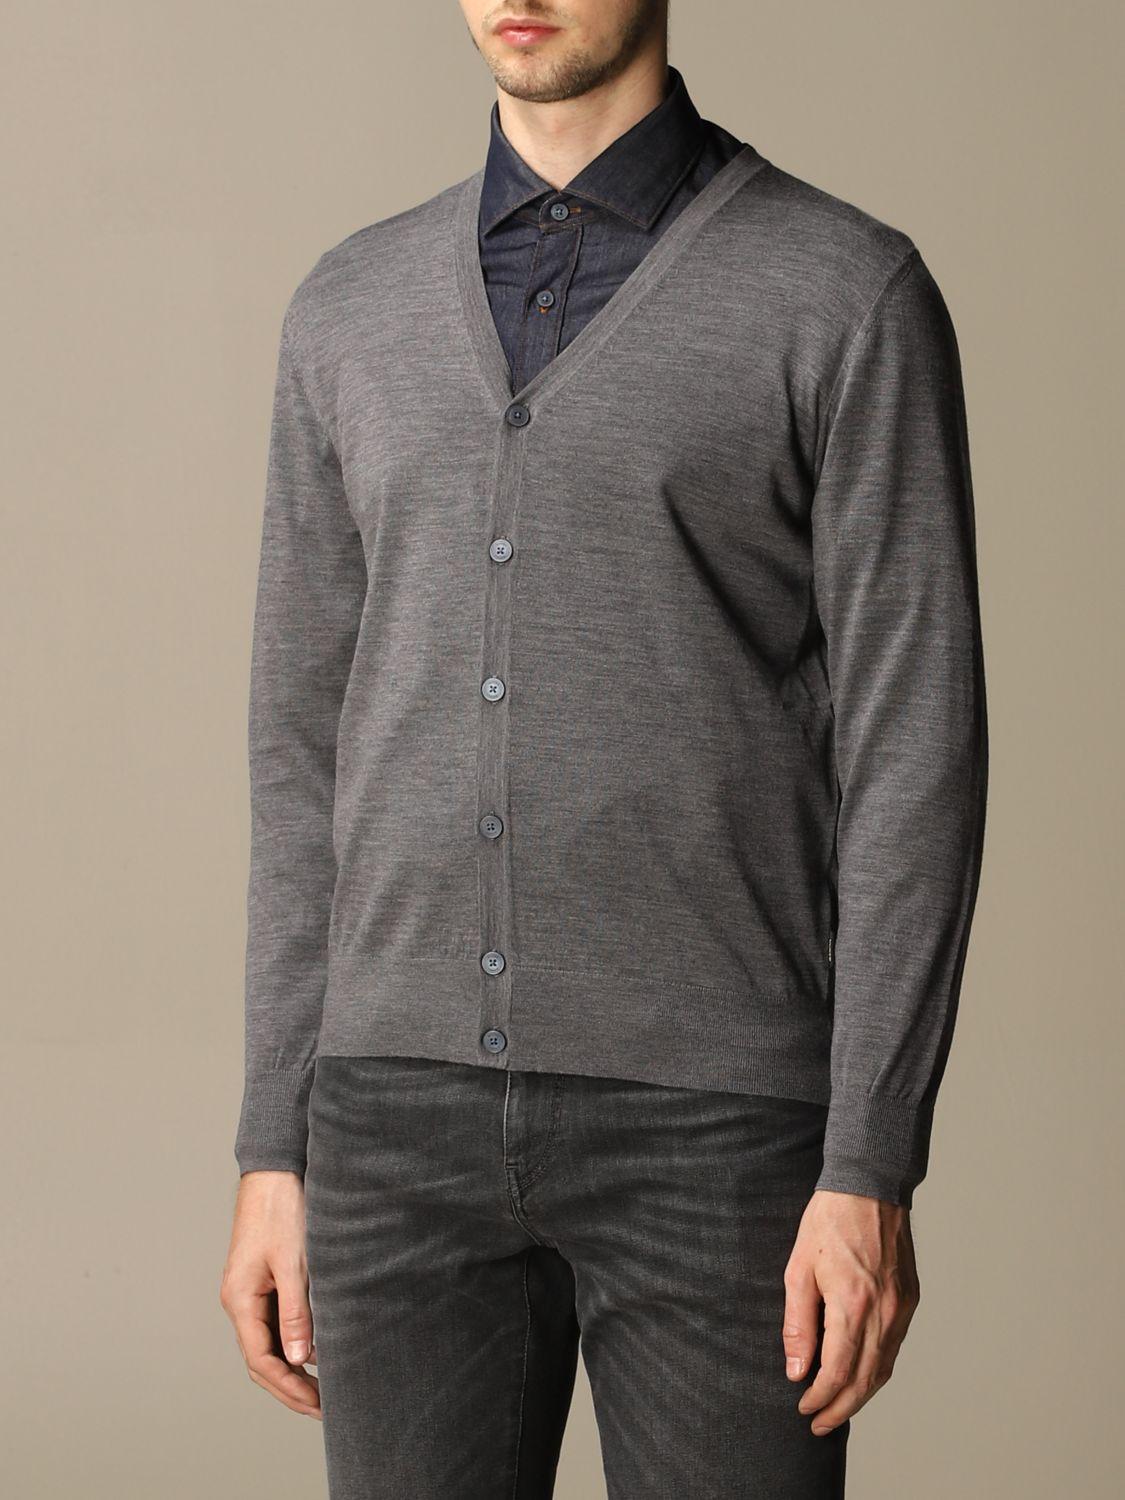 Z Zegna Cardigan in Charcoal (Gray) for Men - Lyst